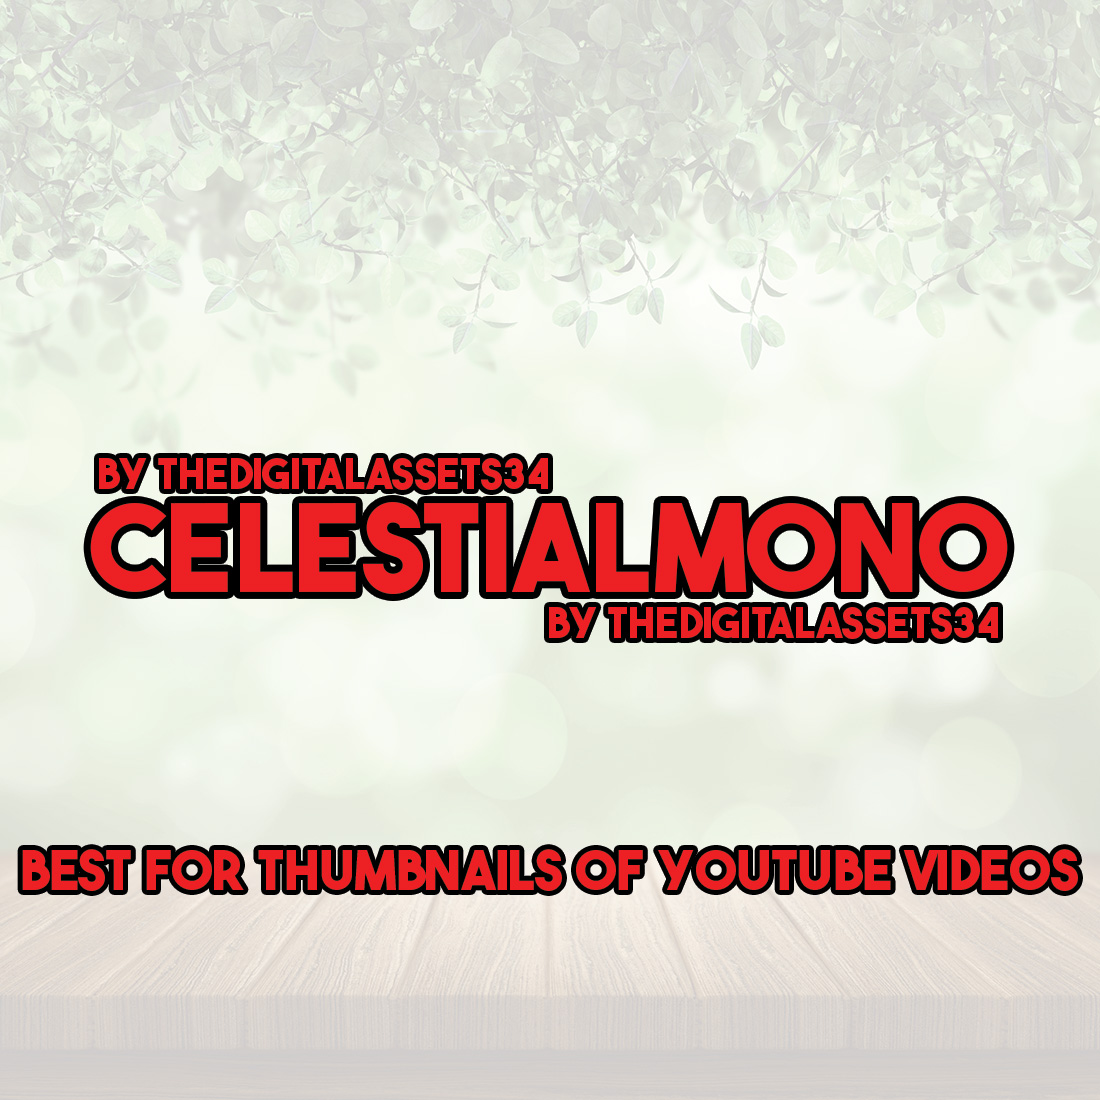 Celetialmono Font Designs | Best For Youtube Thumbnails cover image.